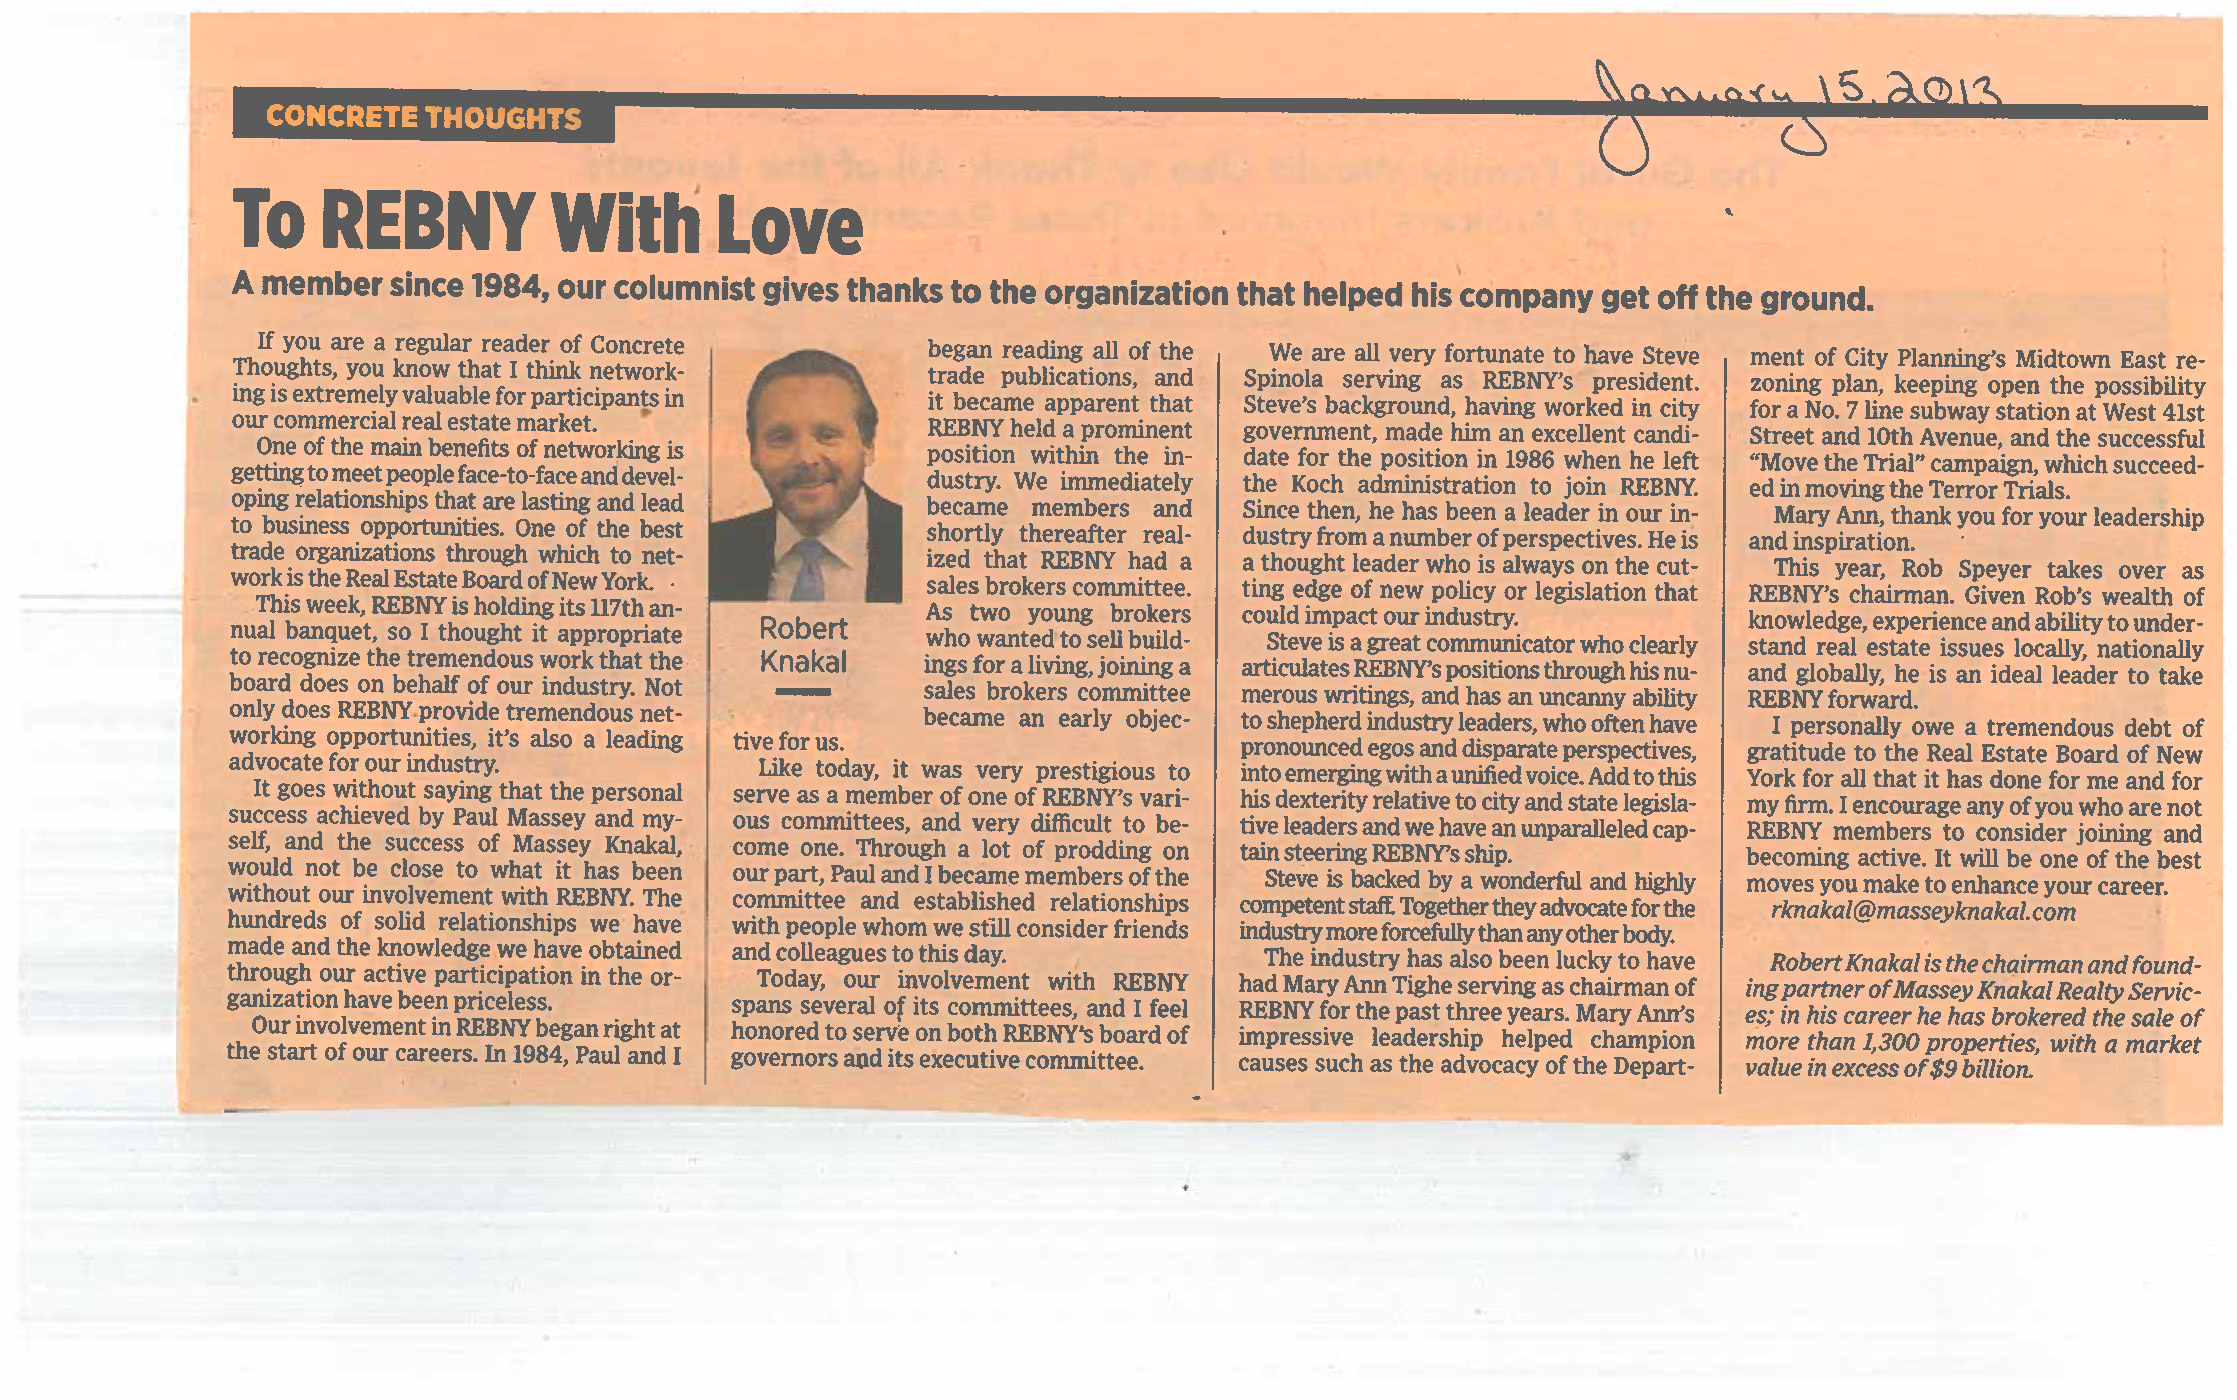 Concrete Thoughts - To REBNY With Love - Jan 15 2013